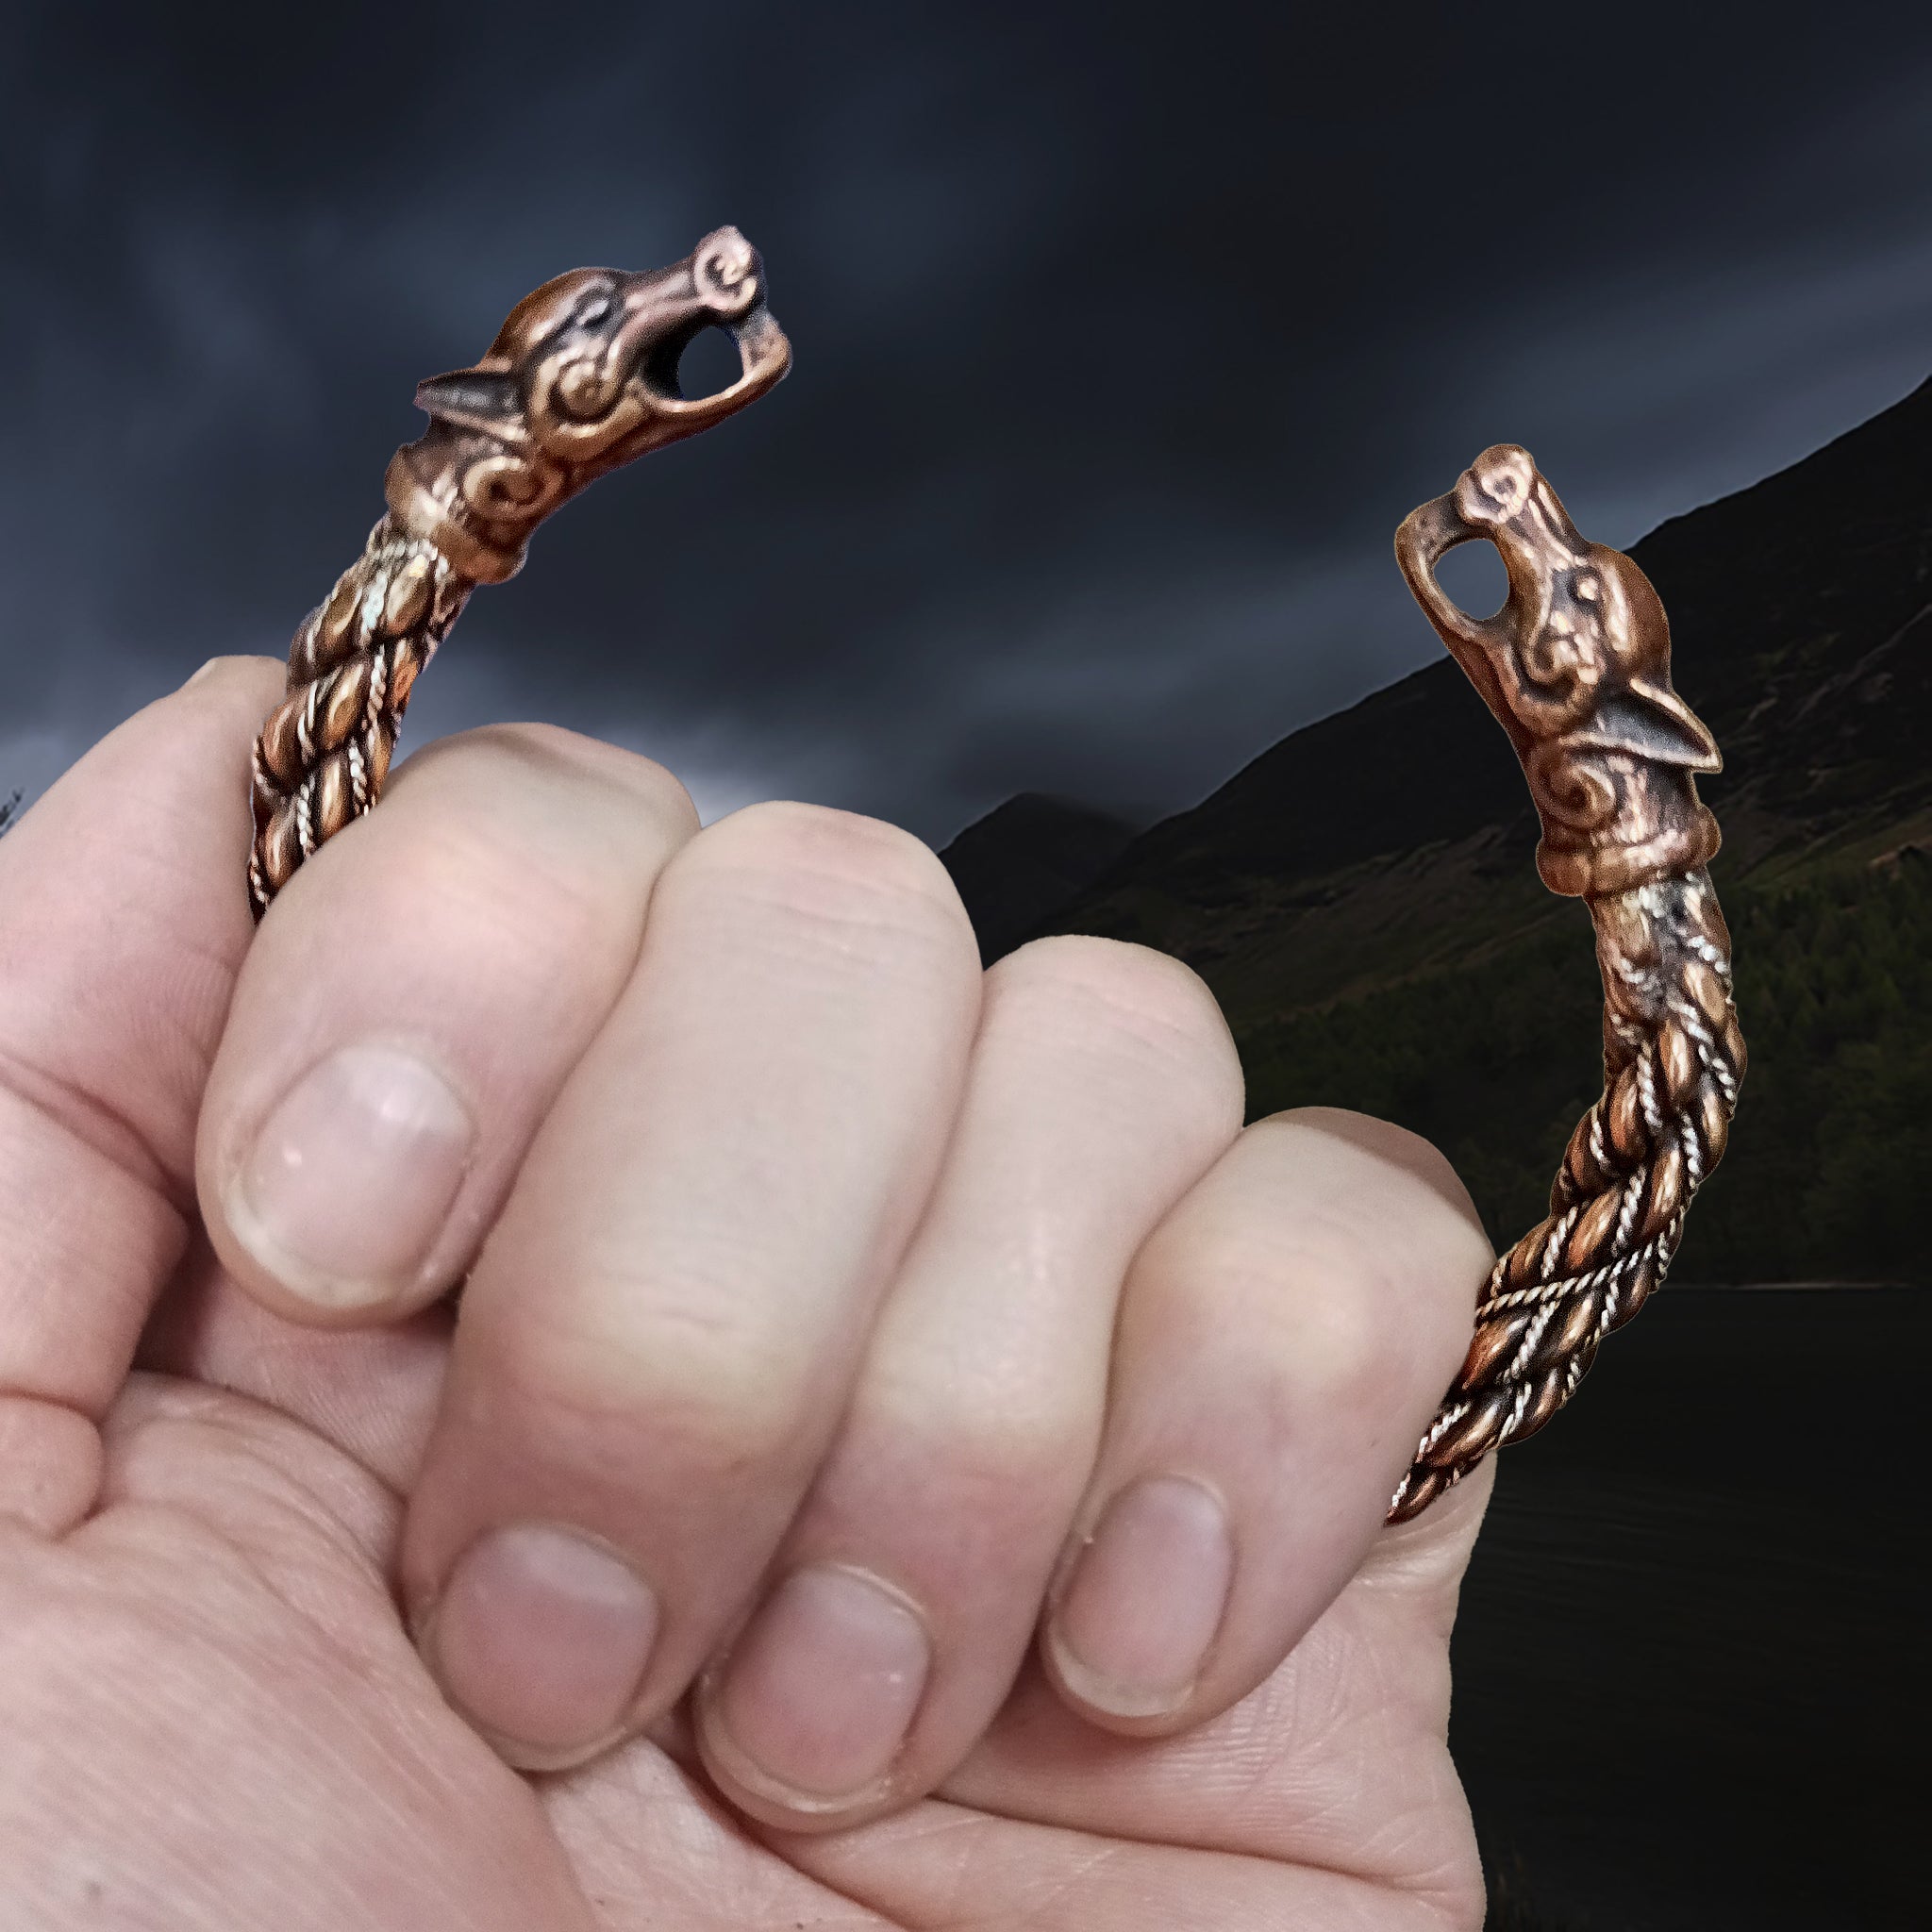 Handmade Twisted Bronze and Silver Arm Ring / Bracelet With Ferocious Wolf Heads in Hand